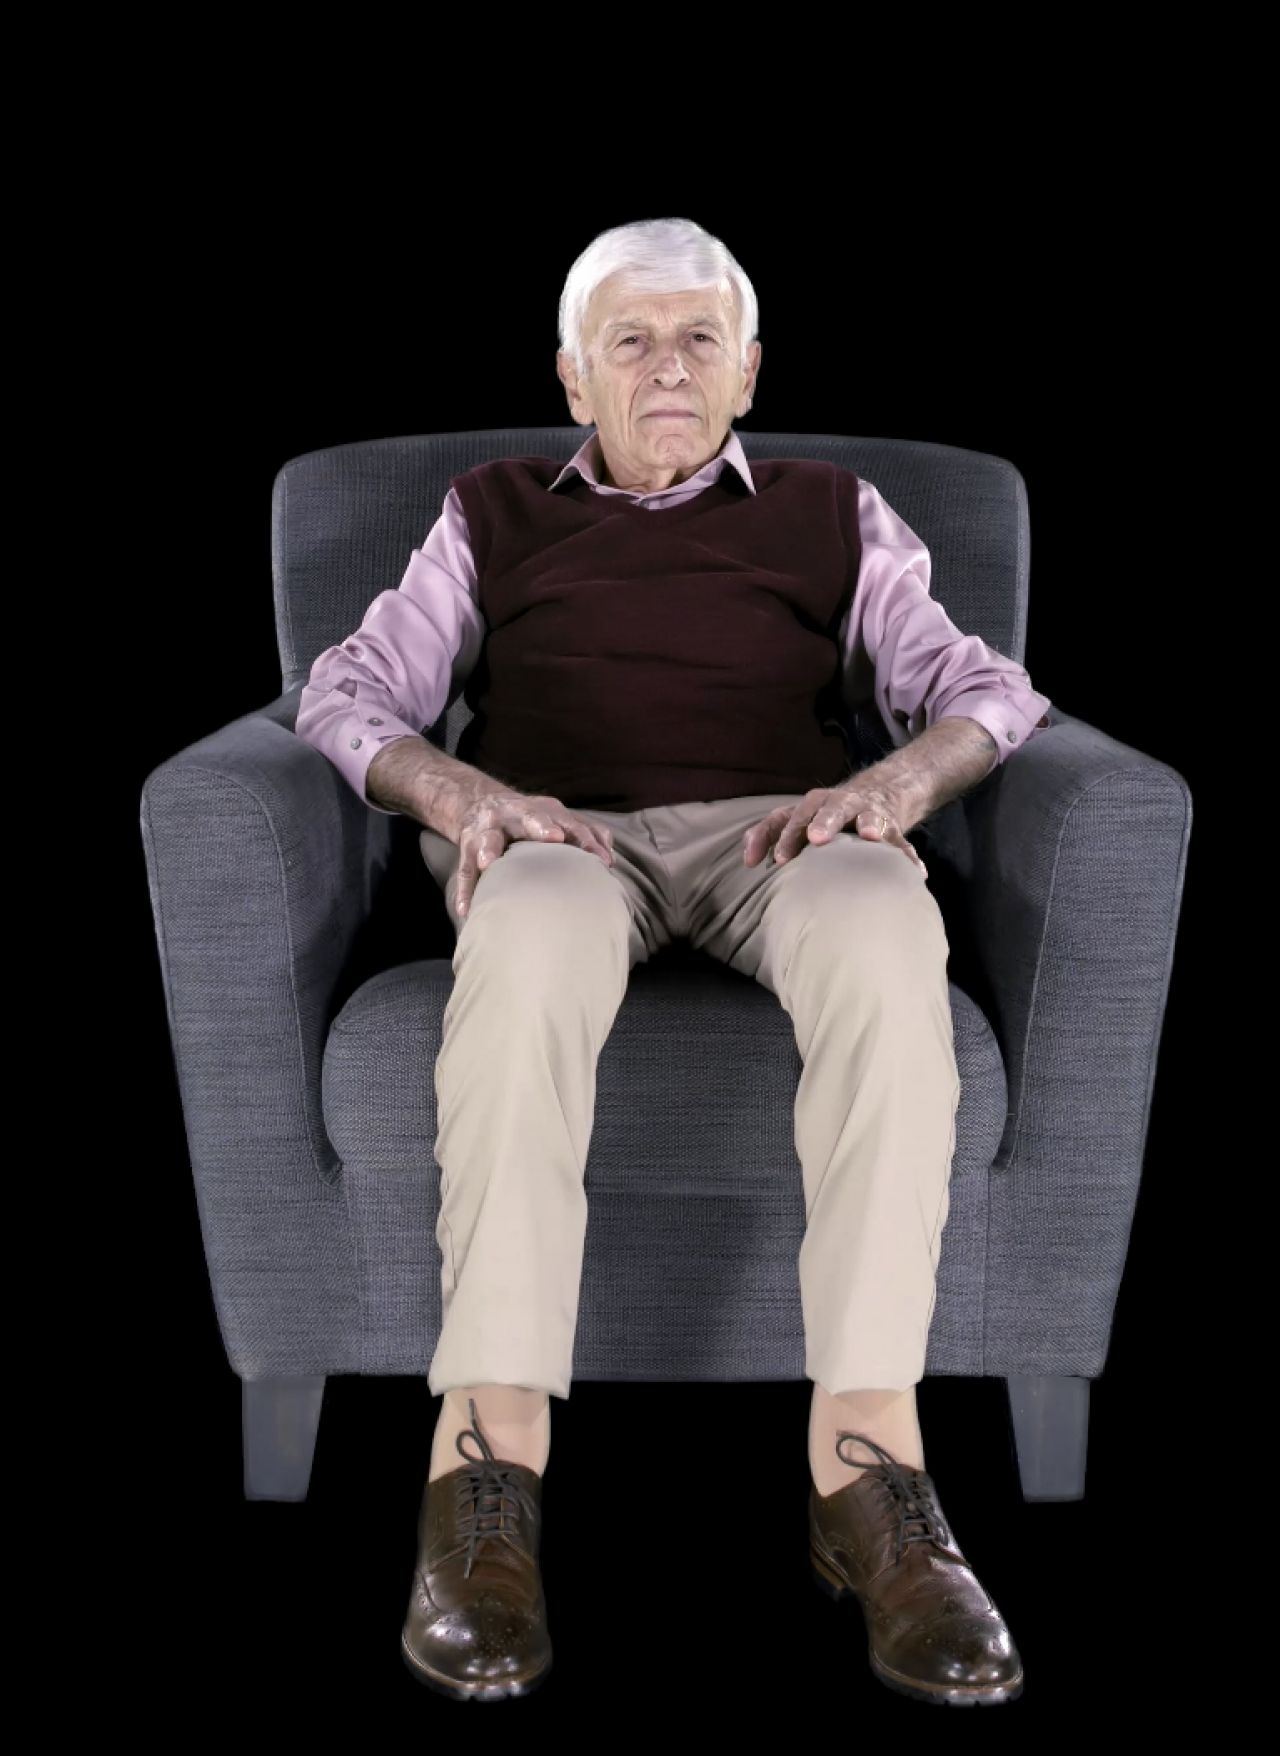 Gray haired man in a sweater vest seated in a comfy chair.